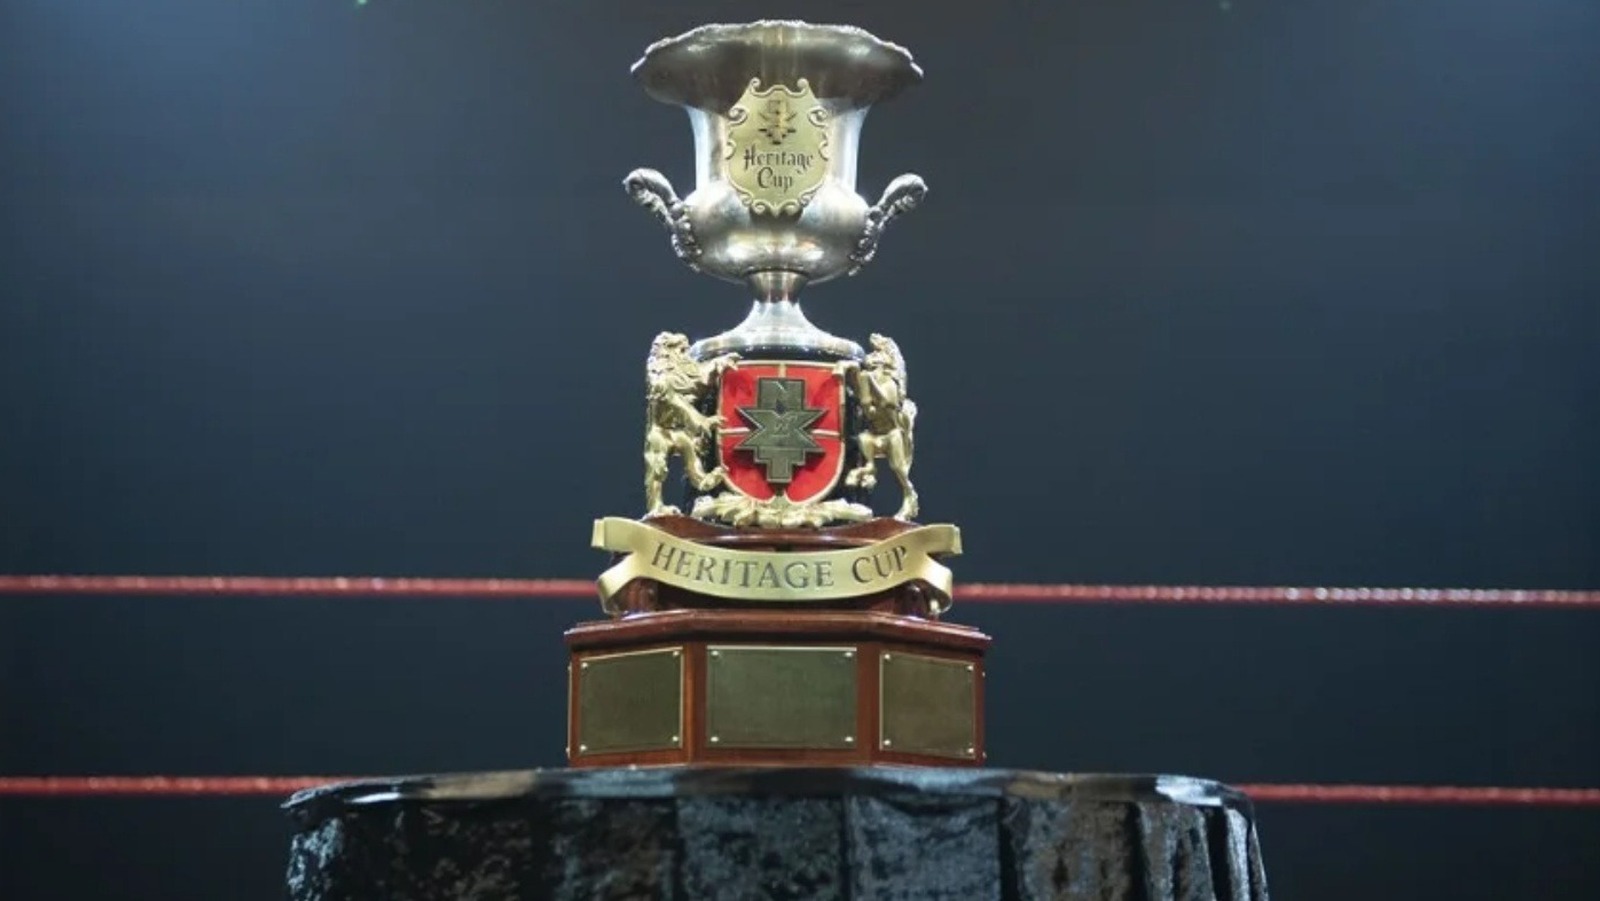 New NXT Heritage Cup Champion Crowned